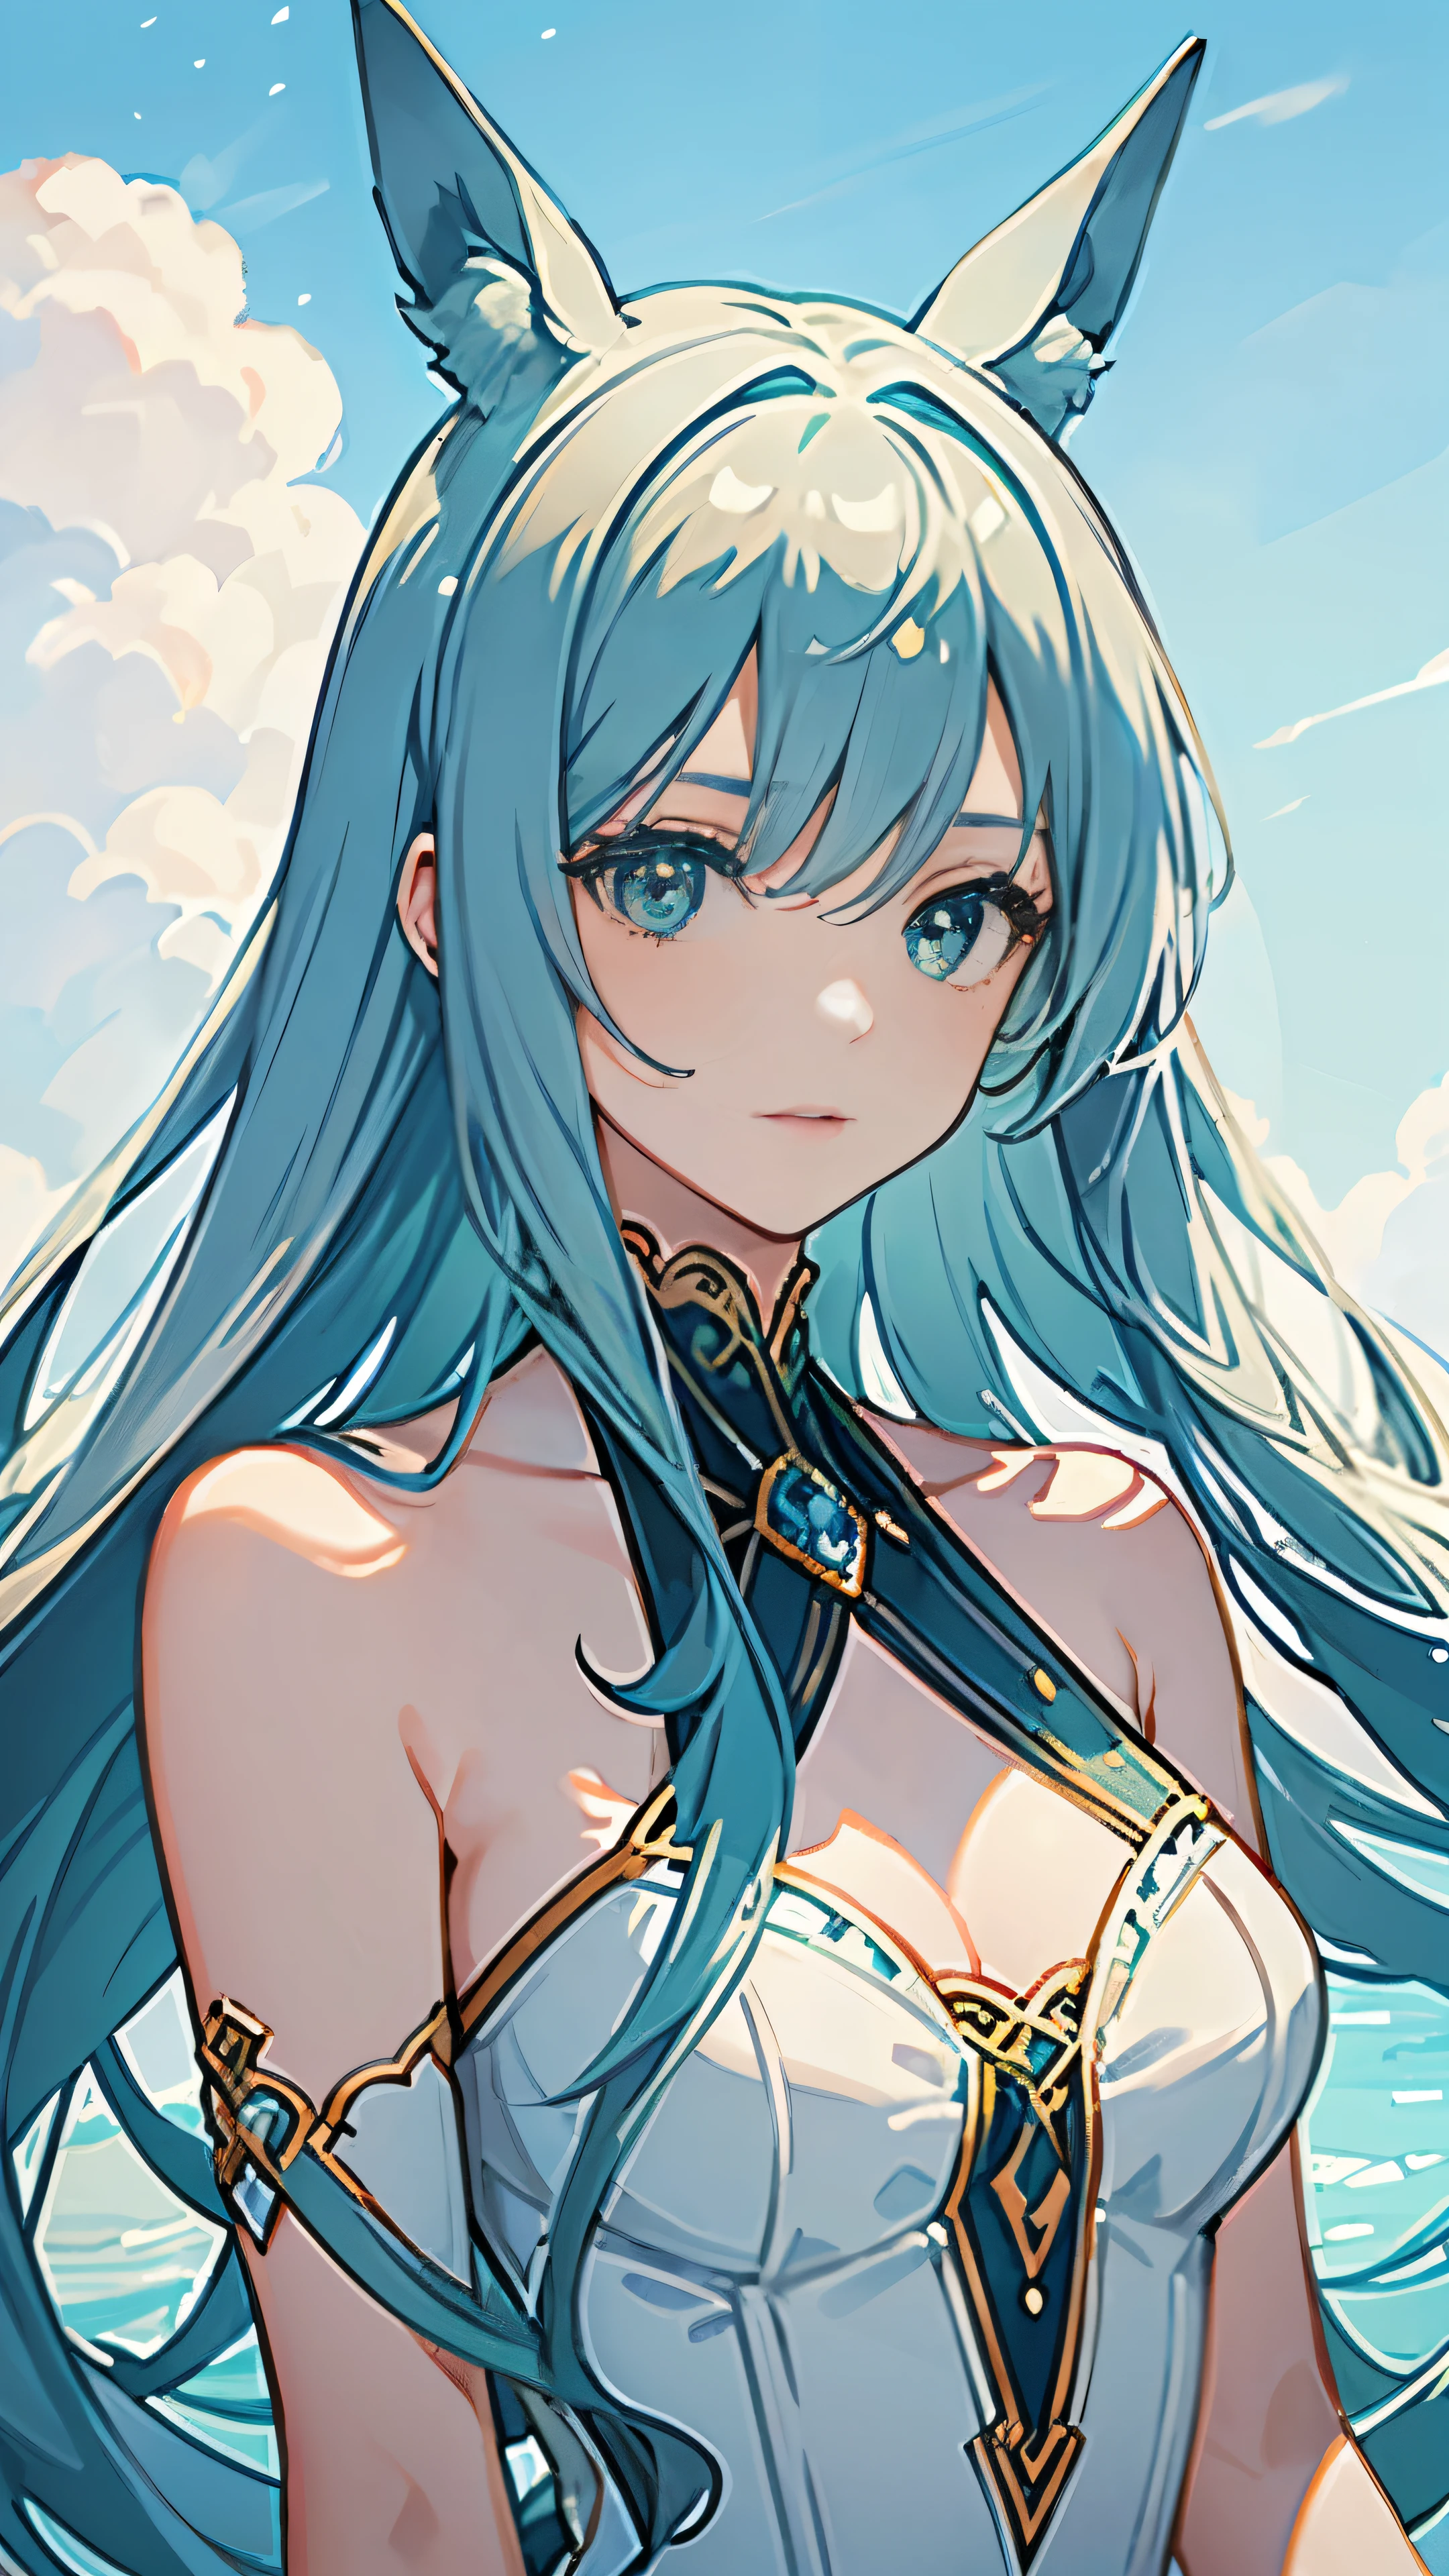 ((masterpiece, best quality)) illustration of a delicate and beautiful girl with long blue hair and green eyes, resembling a Godolphin Arabian horse girl. Wearing a white, sleeveless evening dress with bare shoulders, she is situated in an outdoor setting under a light blue sky and at the horizon of a meadow. Horse ears adorn her head, and a hair ornament accessorizes her look. The scene is filled with a soft, detailed light and the calculation is set for extreme detail and realism. The atmosphere is serene and dreamlike. (Extreme detail description, idealized beauty, horse girl, evening dress, blue sky, meadow, soft light, detailed rendering, masterpiece quality